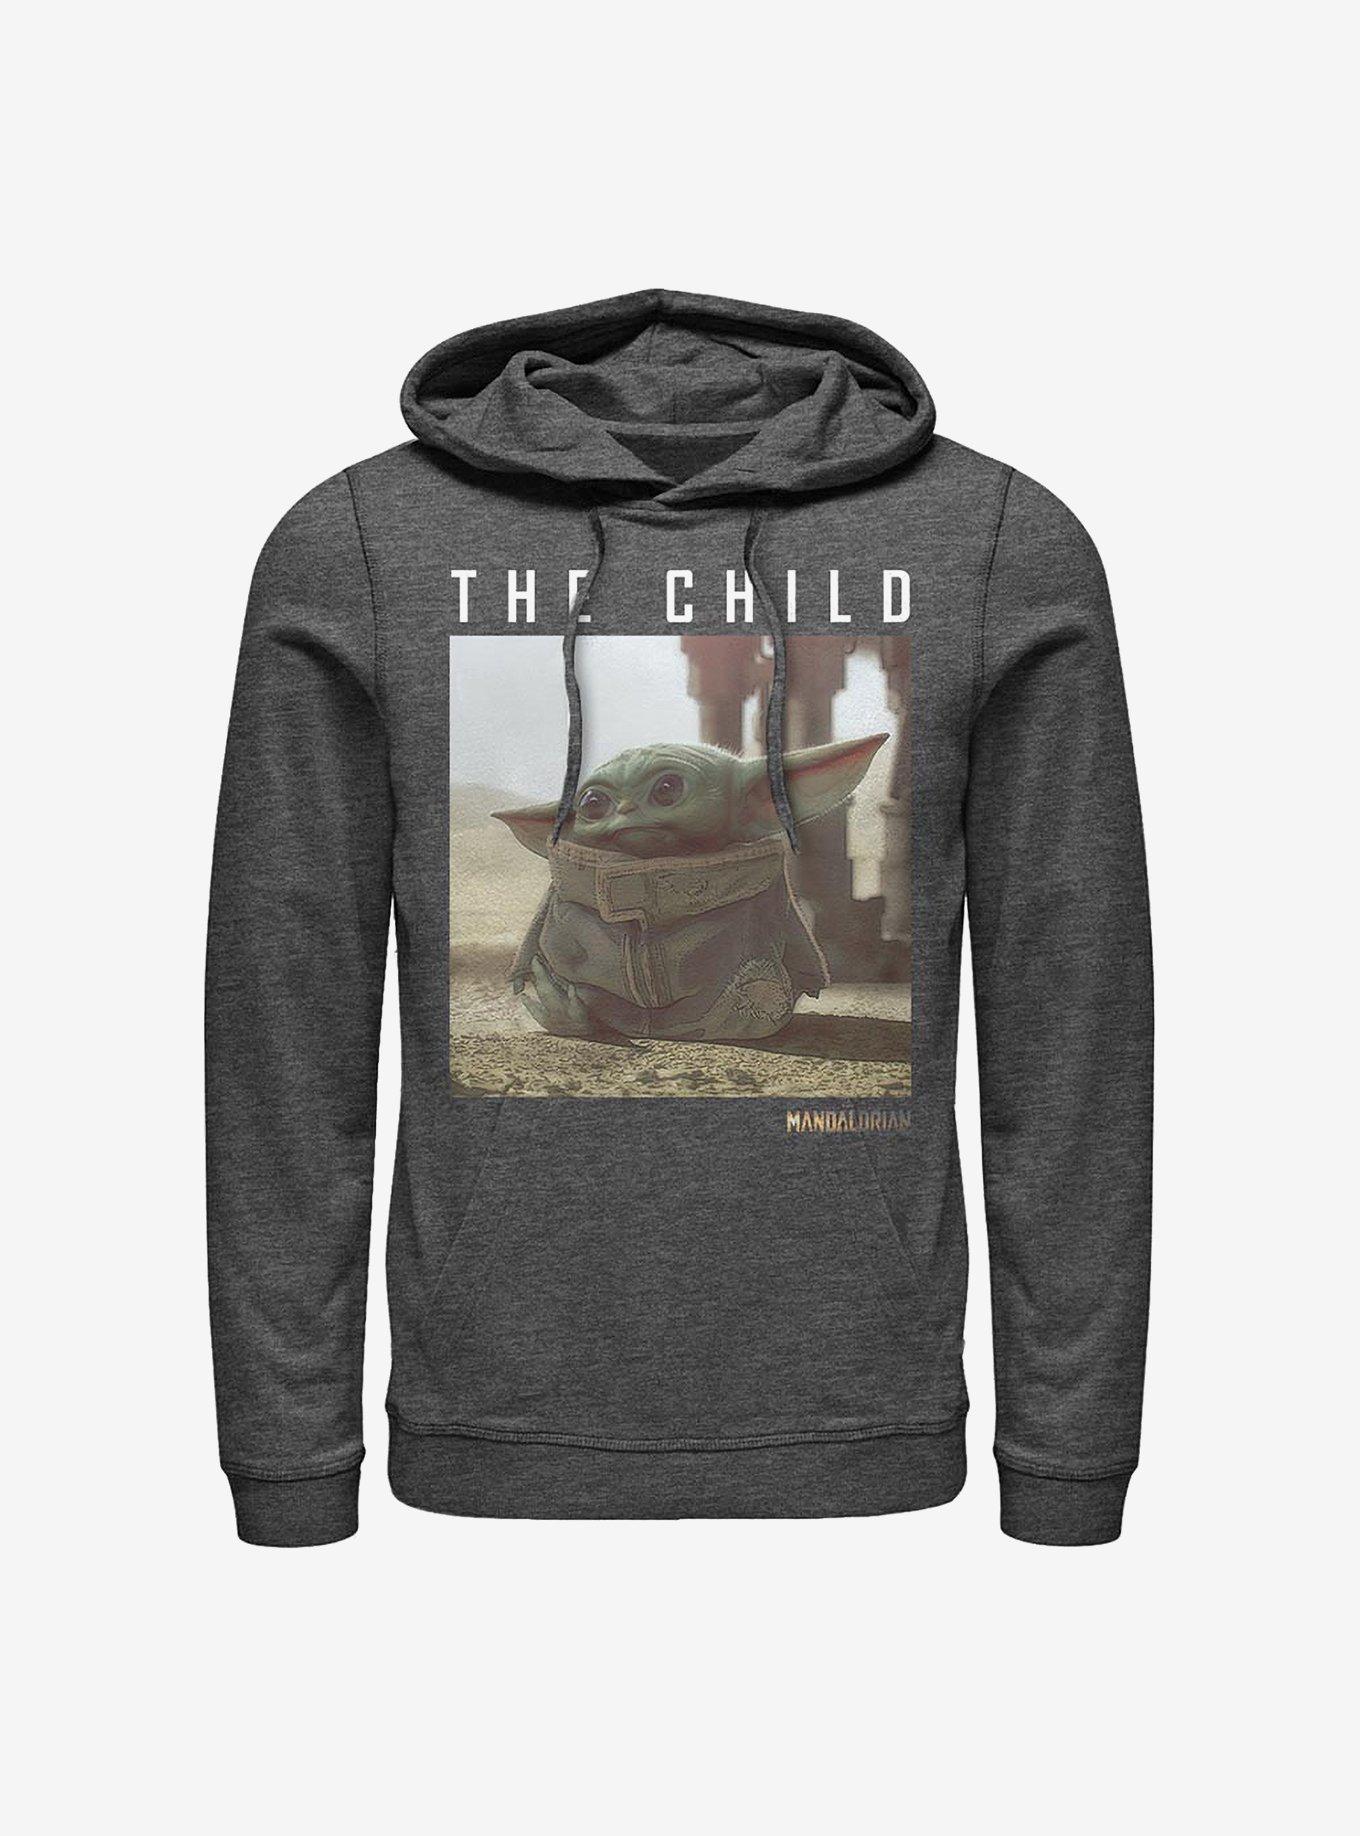 Star Wars The Mandalorian The Child Classic Pose Hoodie, CHAR HTR, hi-res